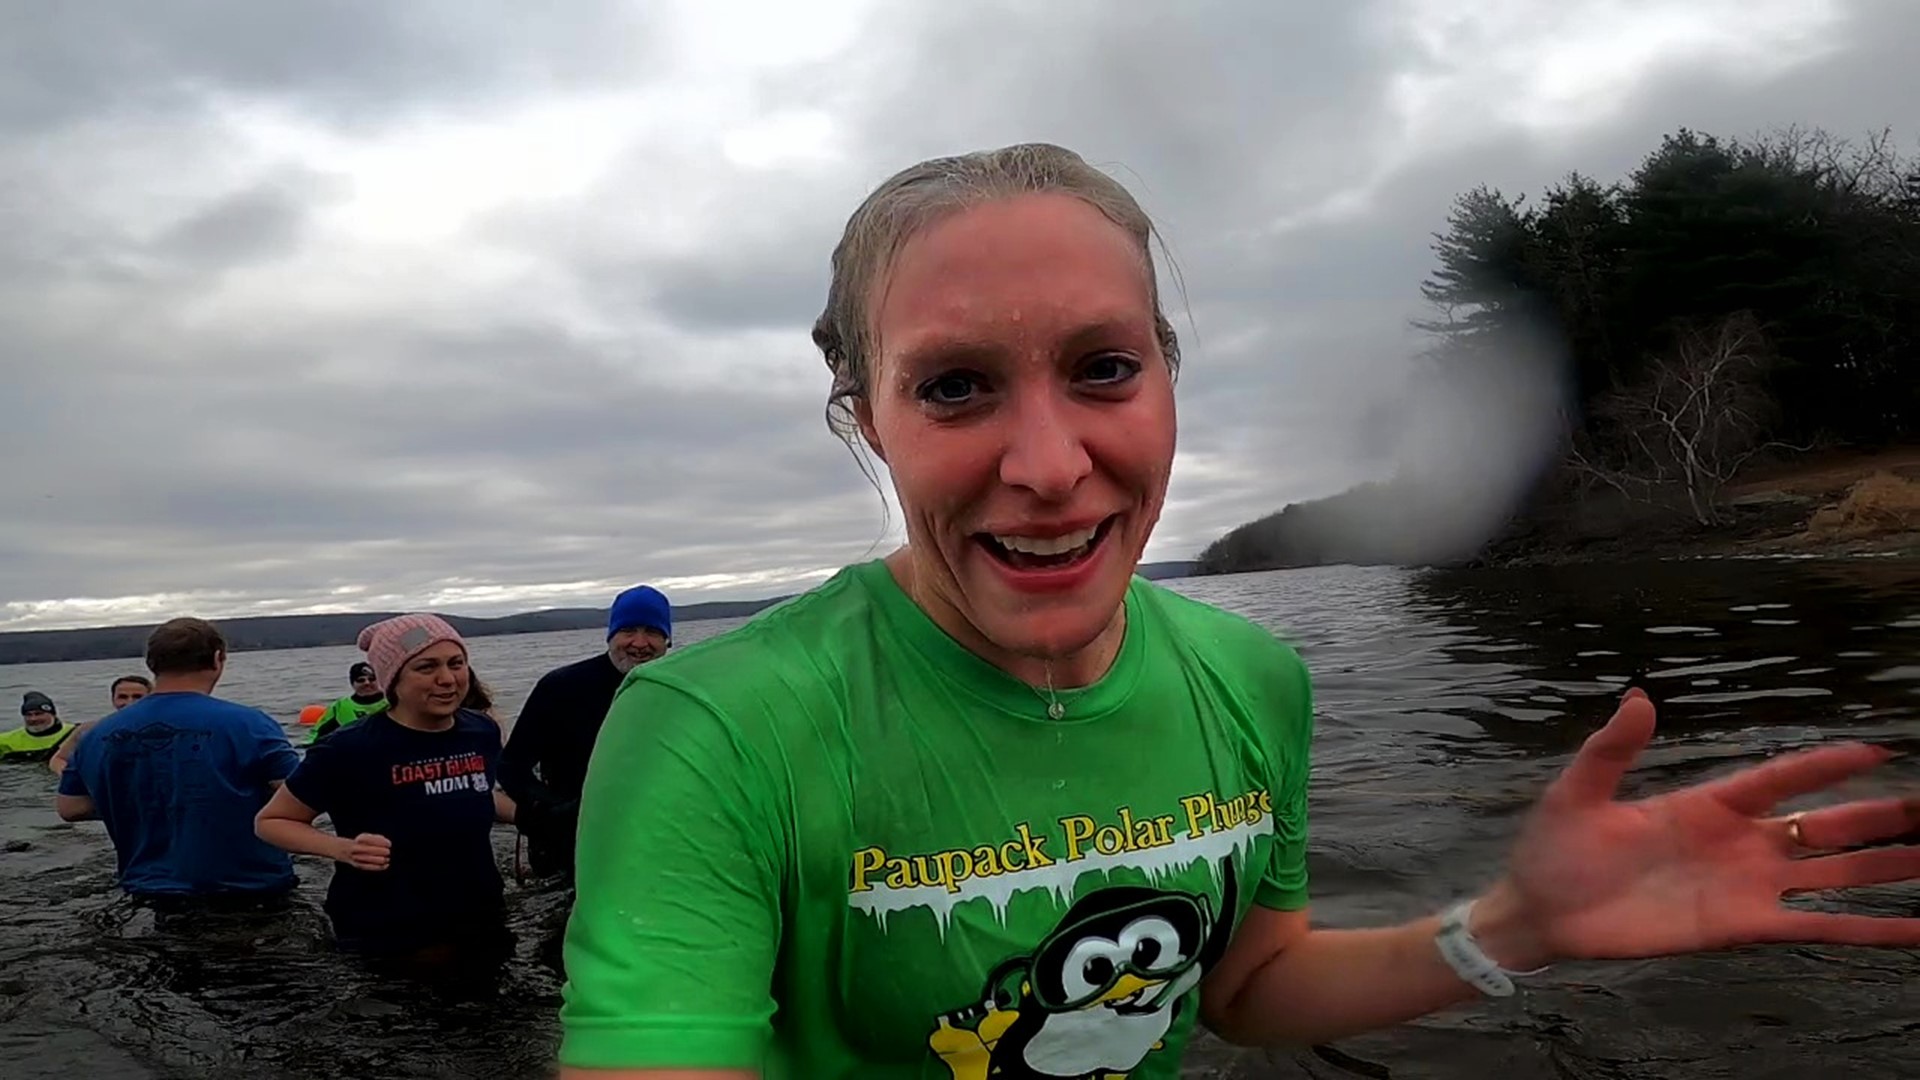 On New Year's Day, Newswatch 16's Chelsea Strub checked out a polar plunge to provide anyone thinking about doing one with some advice.